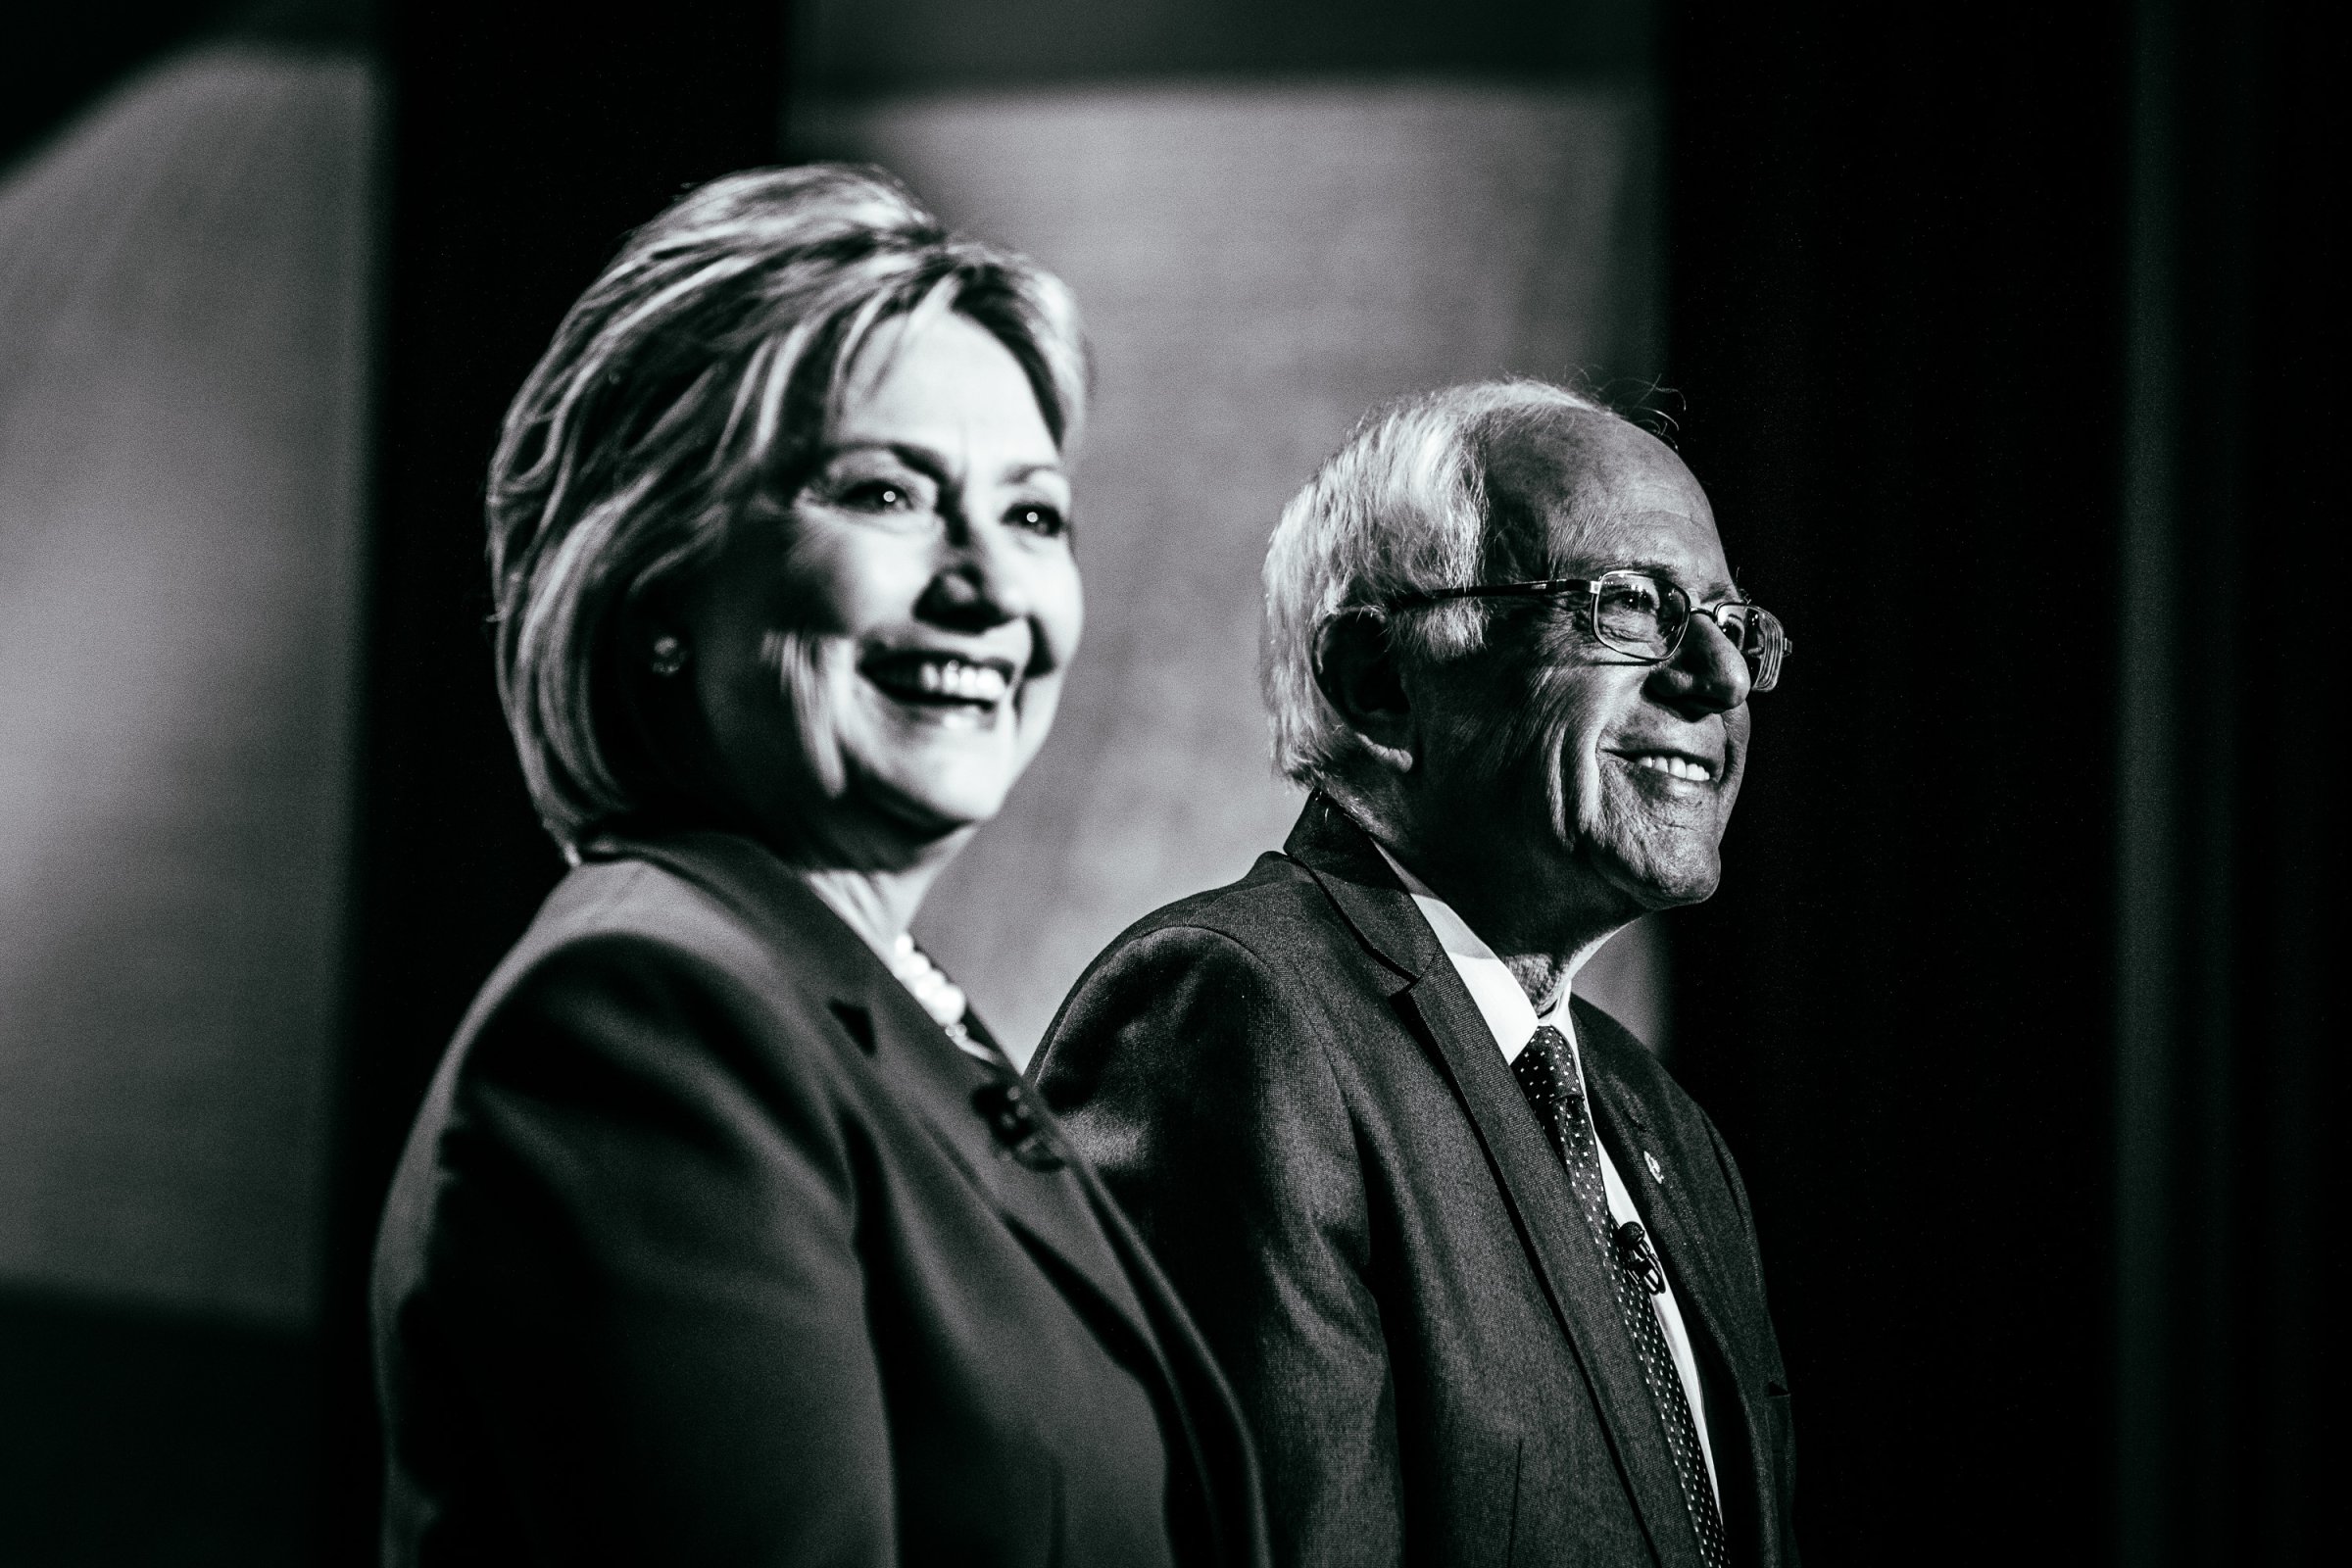 Democratic presidential candidates former Secretary of State Hillary Clinton and U.S. Sen. Bernie Sanders (I-VT) appear at a Democratic debate at the University of New Hampshire on Feb. 4, 2016 in Durham, N.H.